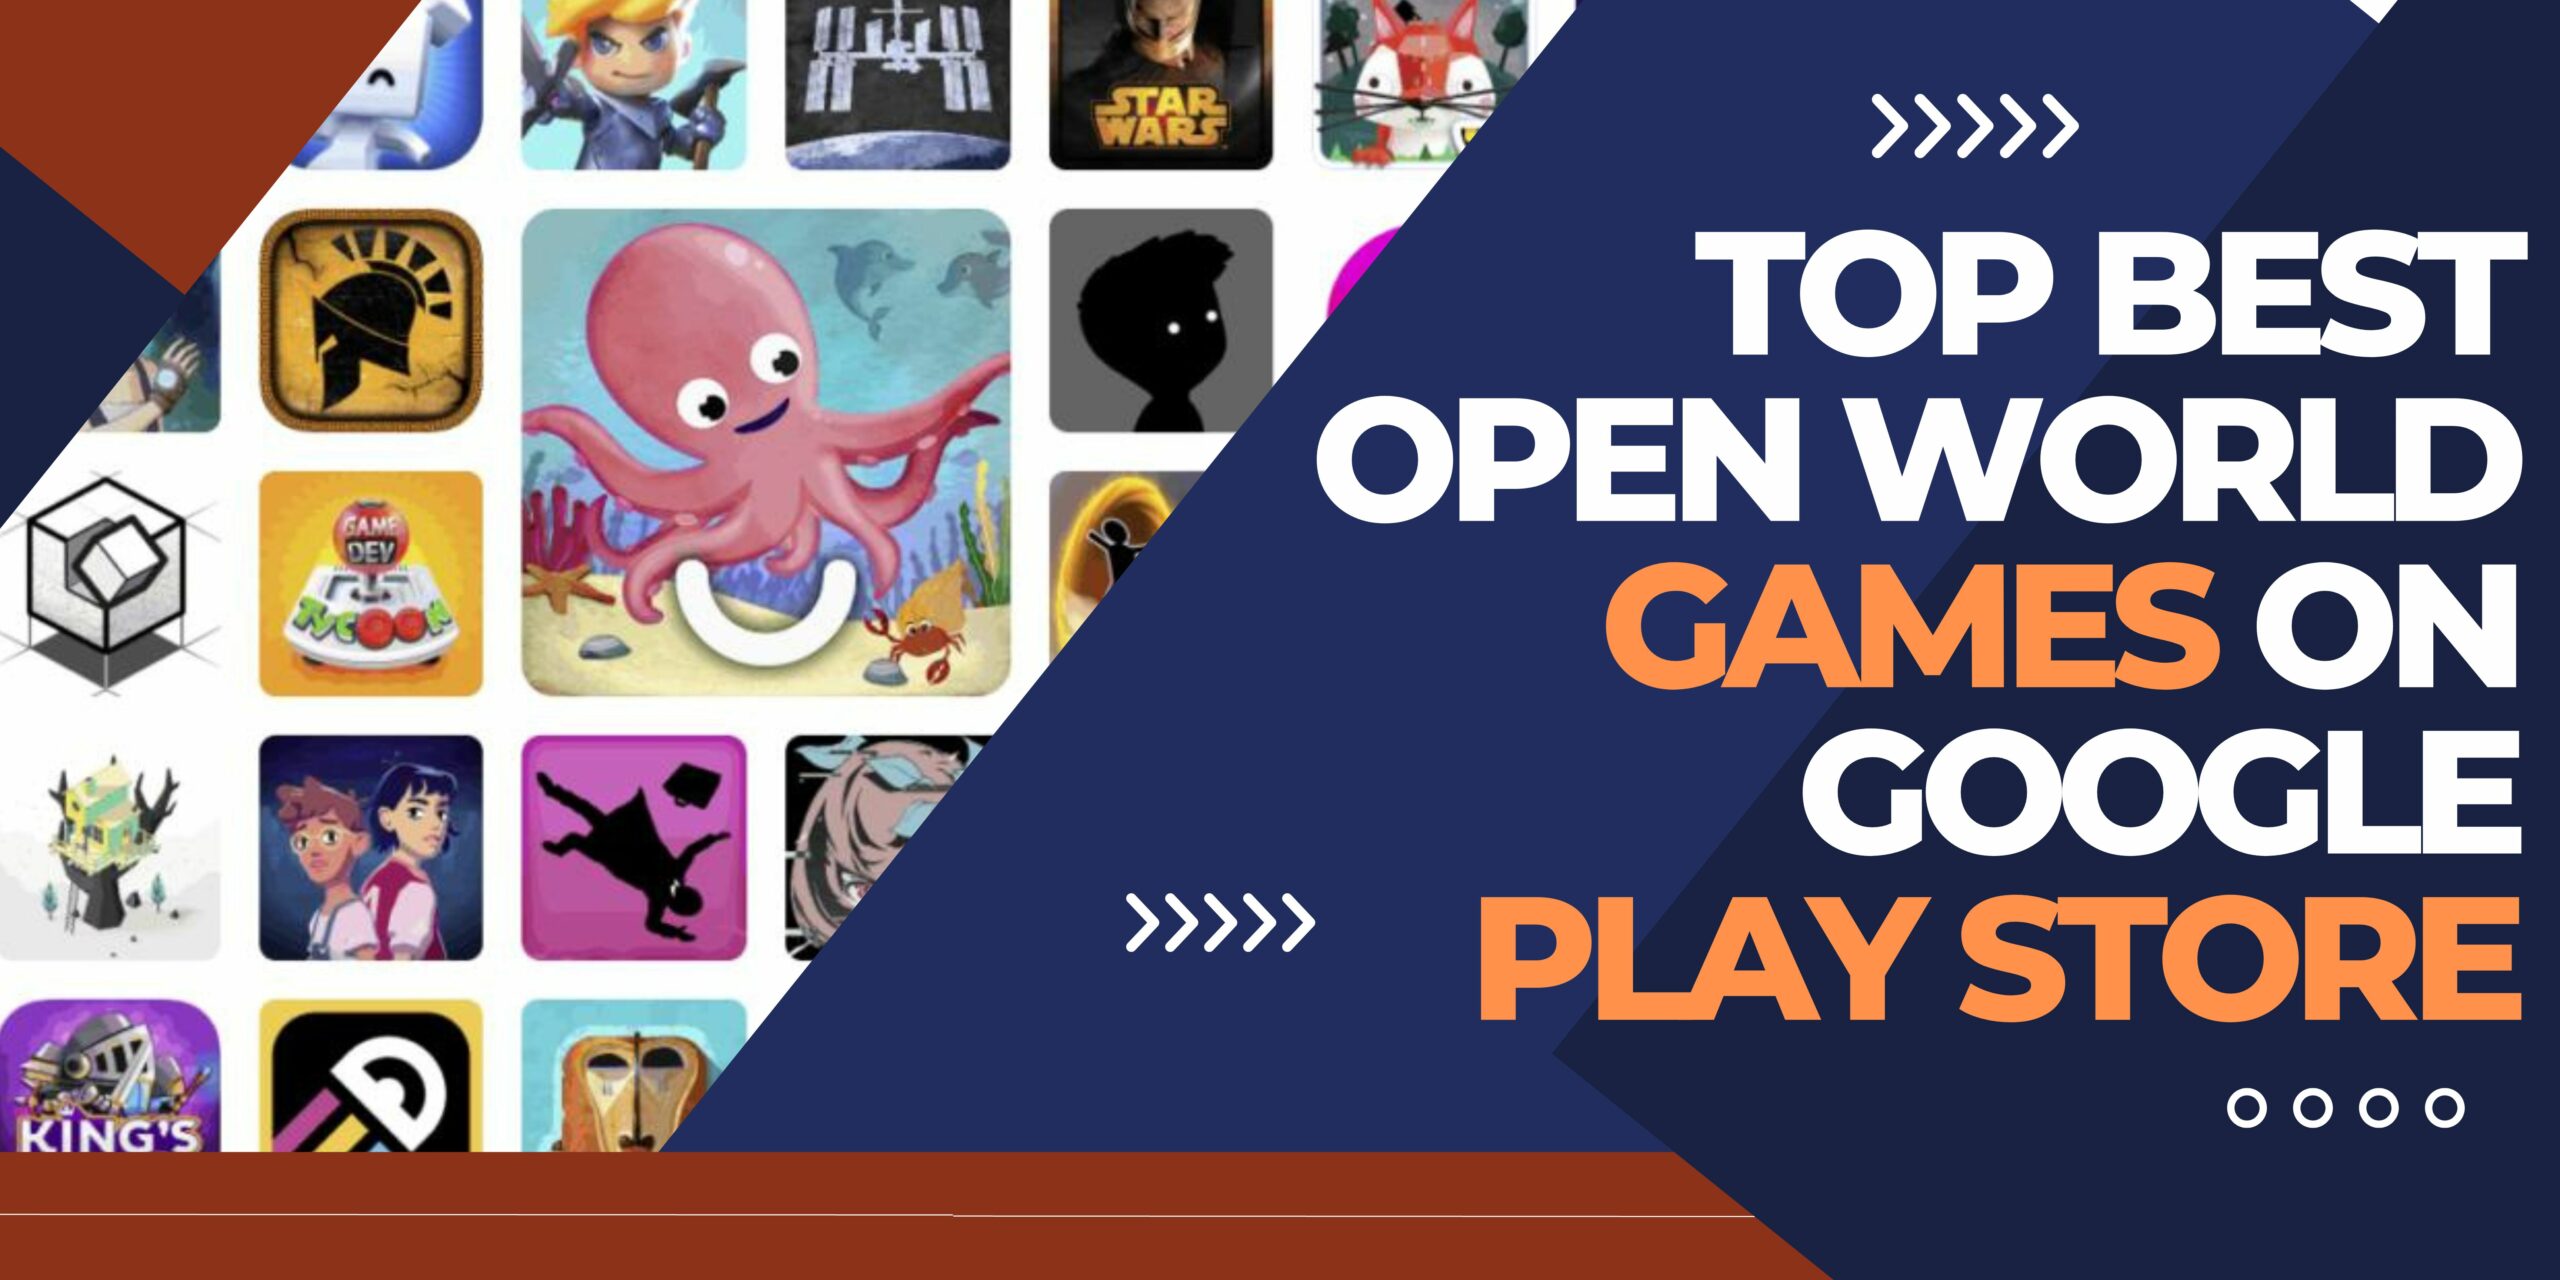 an image of Top Best Open World Games on Google Play Store